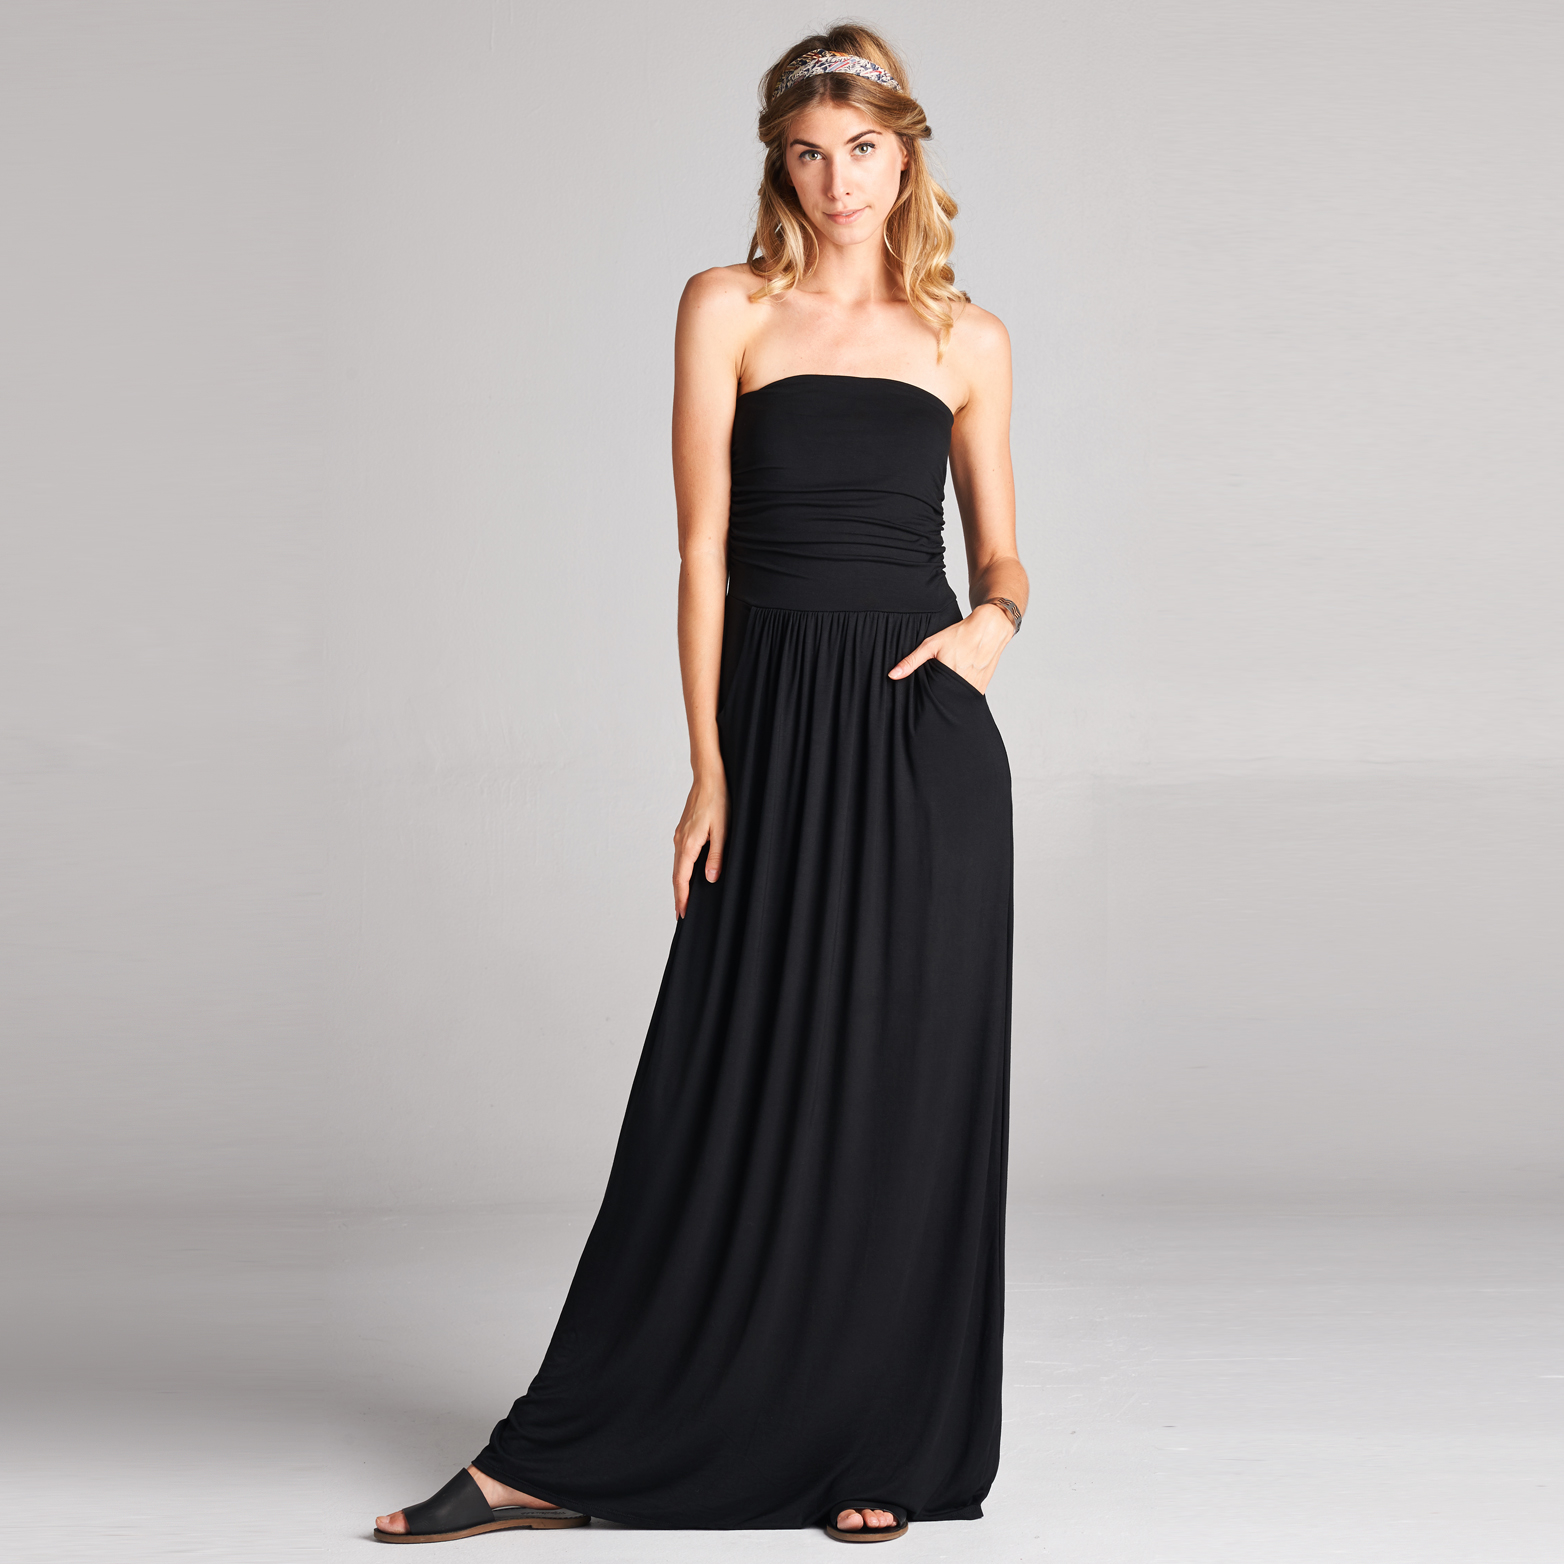 Atlantis Strapless Maxi Dress With Pockets In 6 Colors - Black, Large (12-14)